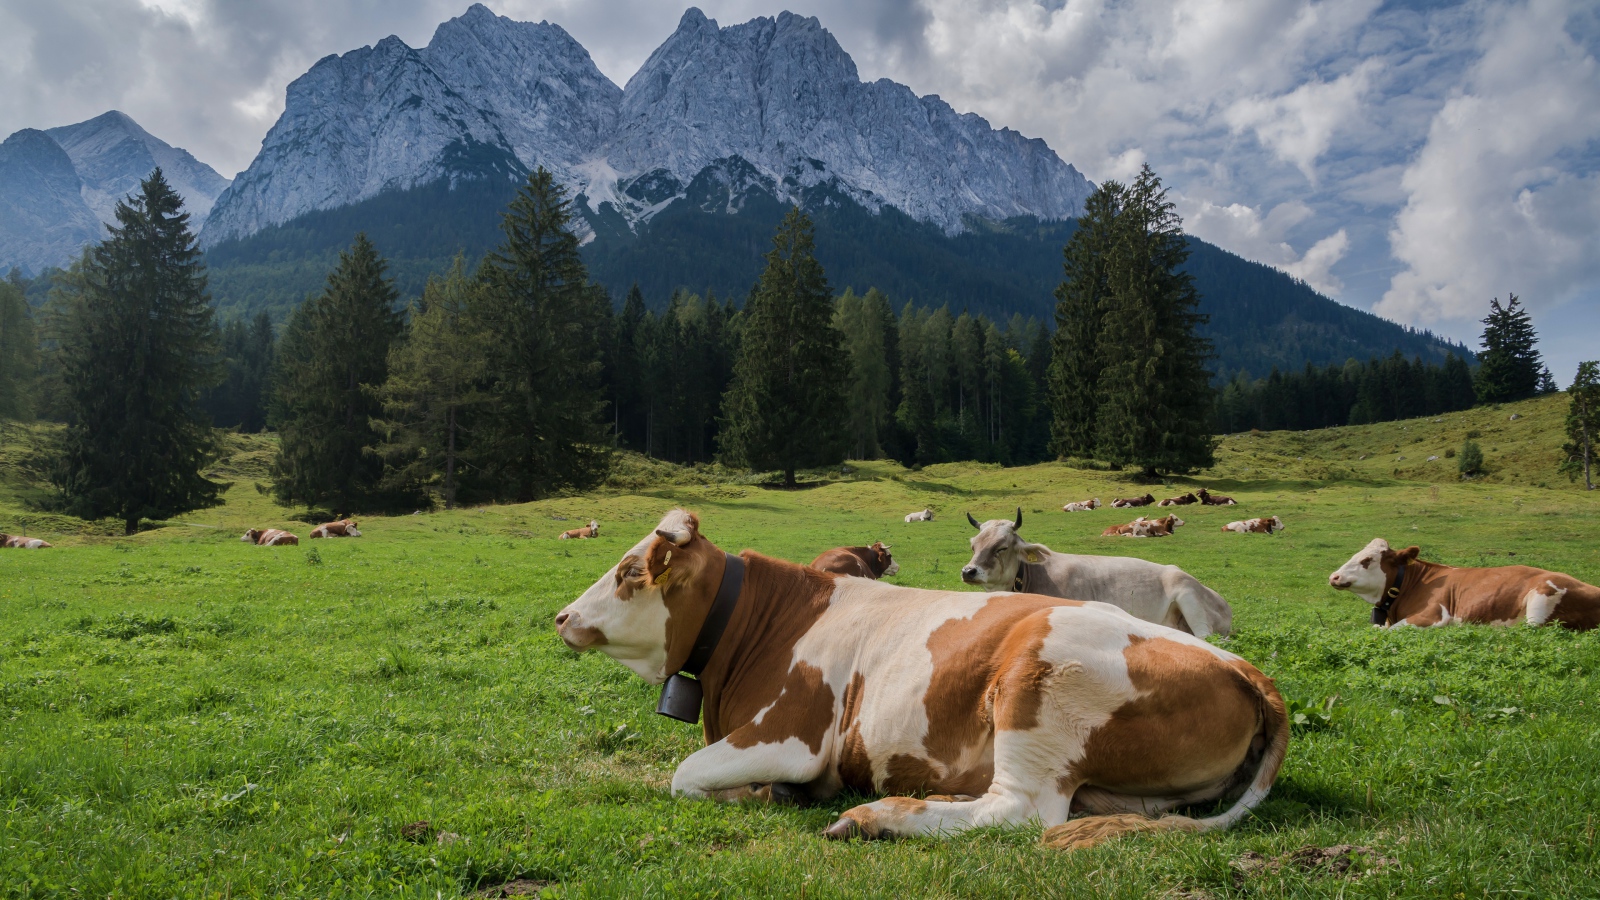 Cows graze in an alpine meadow on a background of mountains